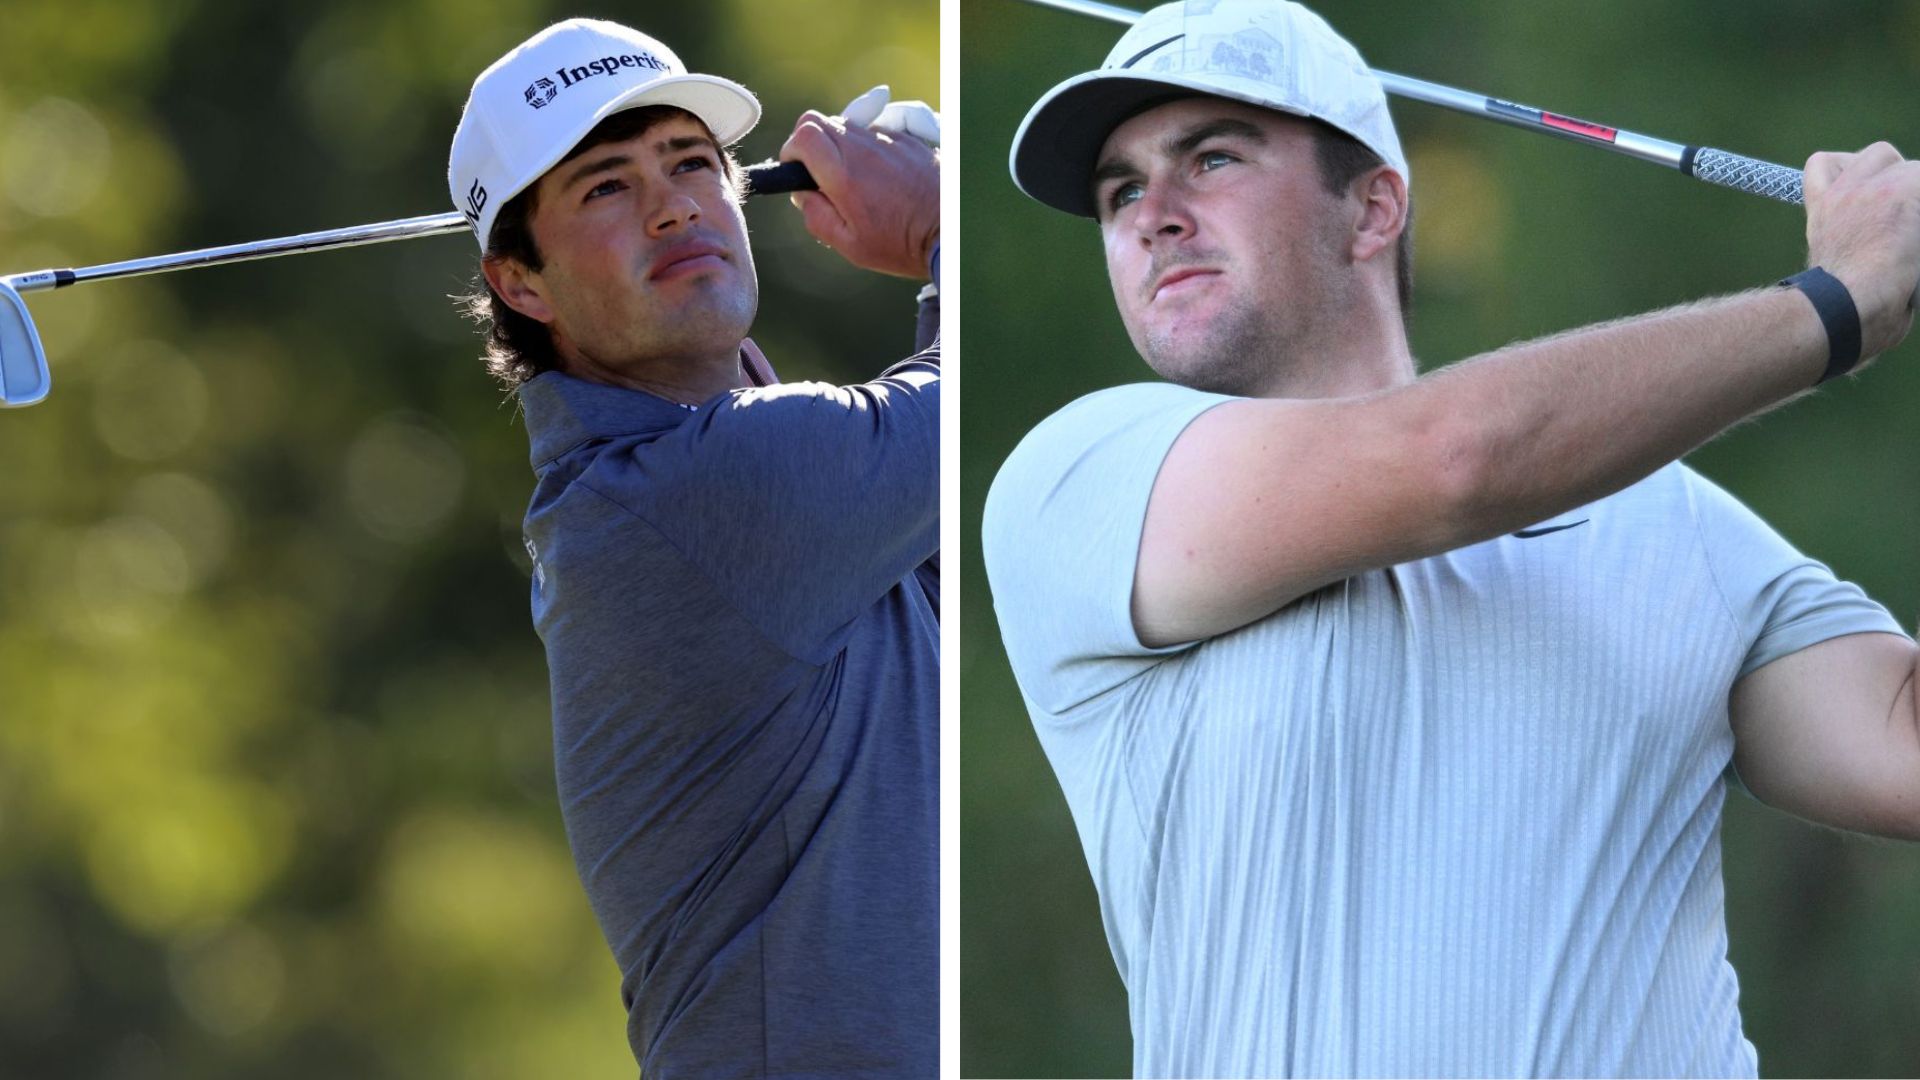 Chris Gotterup, Cole Hammer among PGA Tour U grads chasing KFT starts at final stage of Q-School